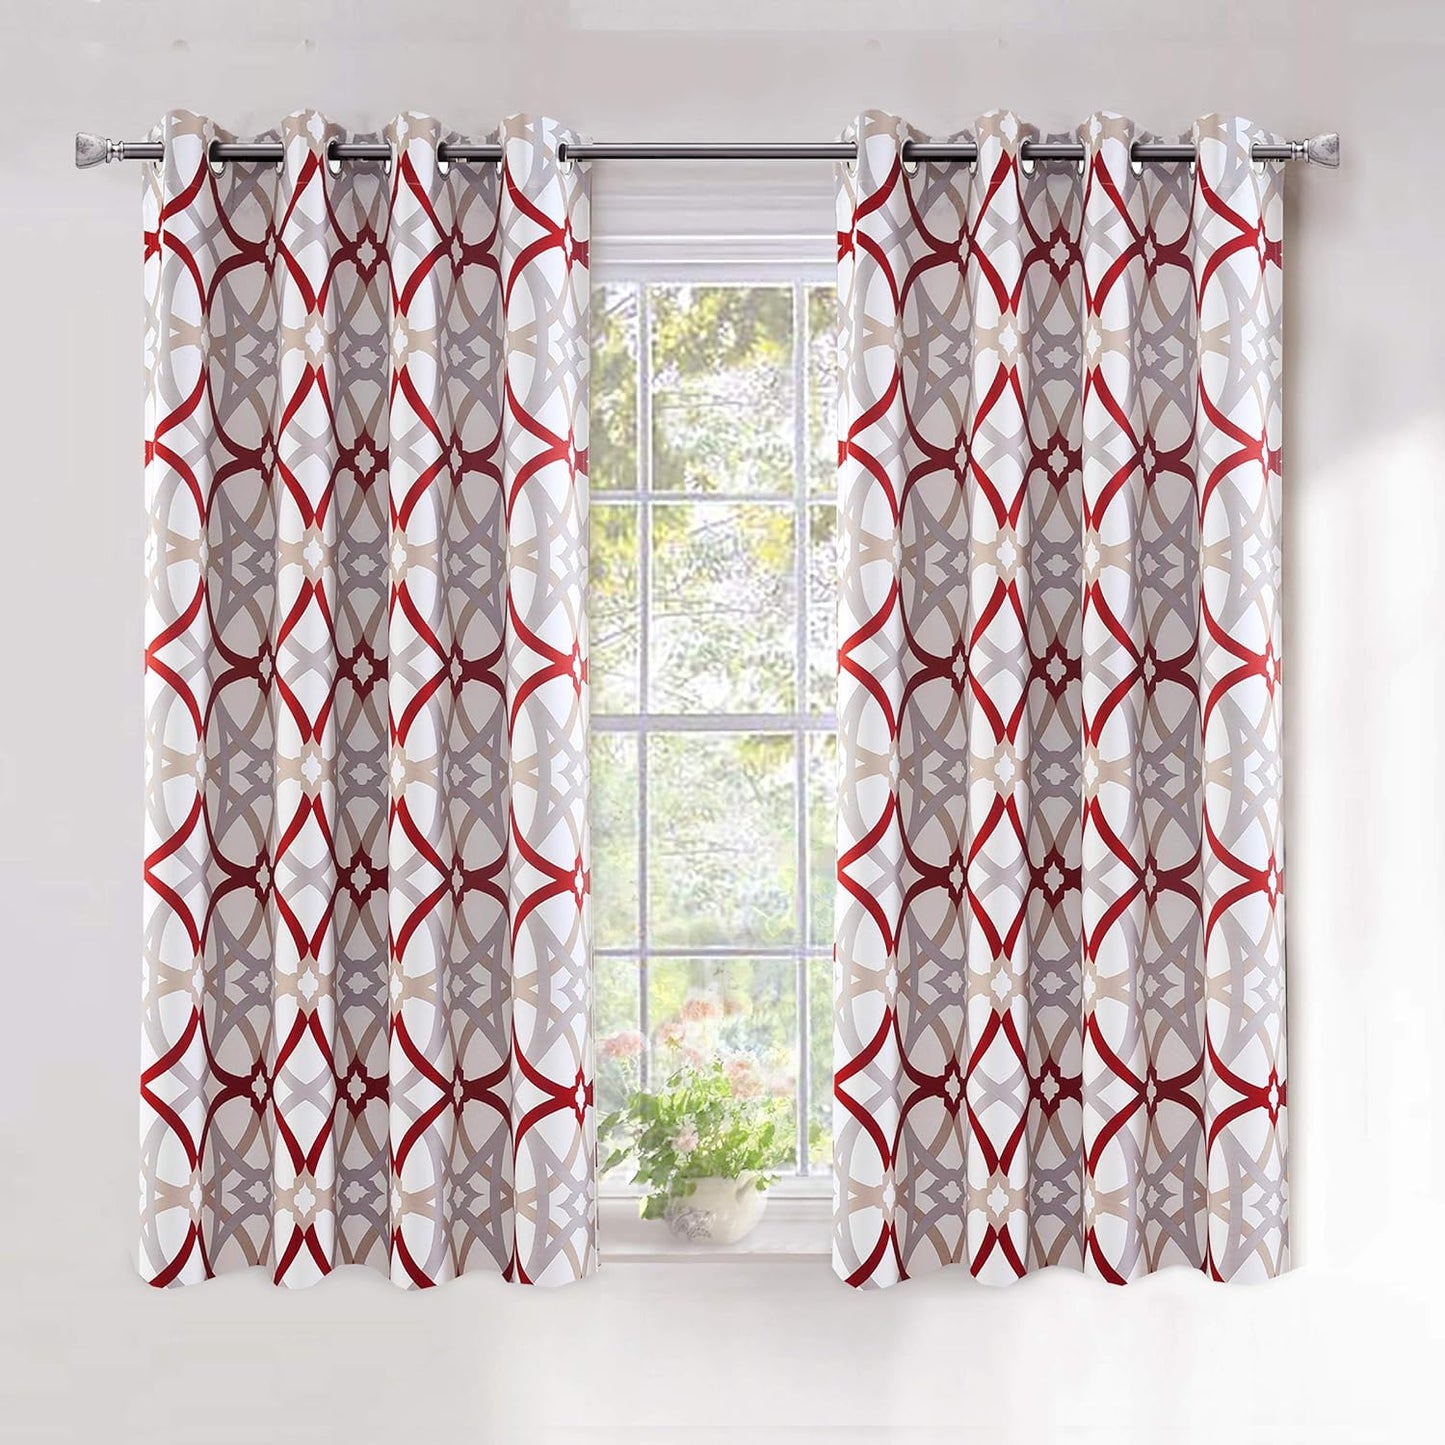 Driftaway Alexander Thermal Blackout Grommet Unlined Window Curtains Spiral Geo Trellis Pattern Set of 2 Panels Each Size 52 Inch by 84 Inch Red and Gray  DriftAway Red/Gray 52''X54'' 